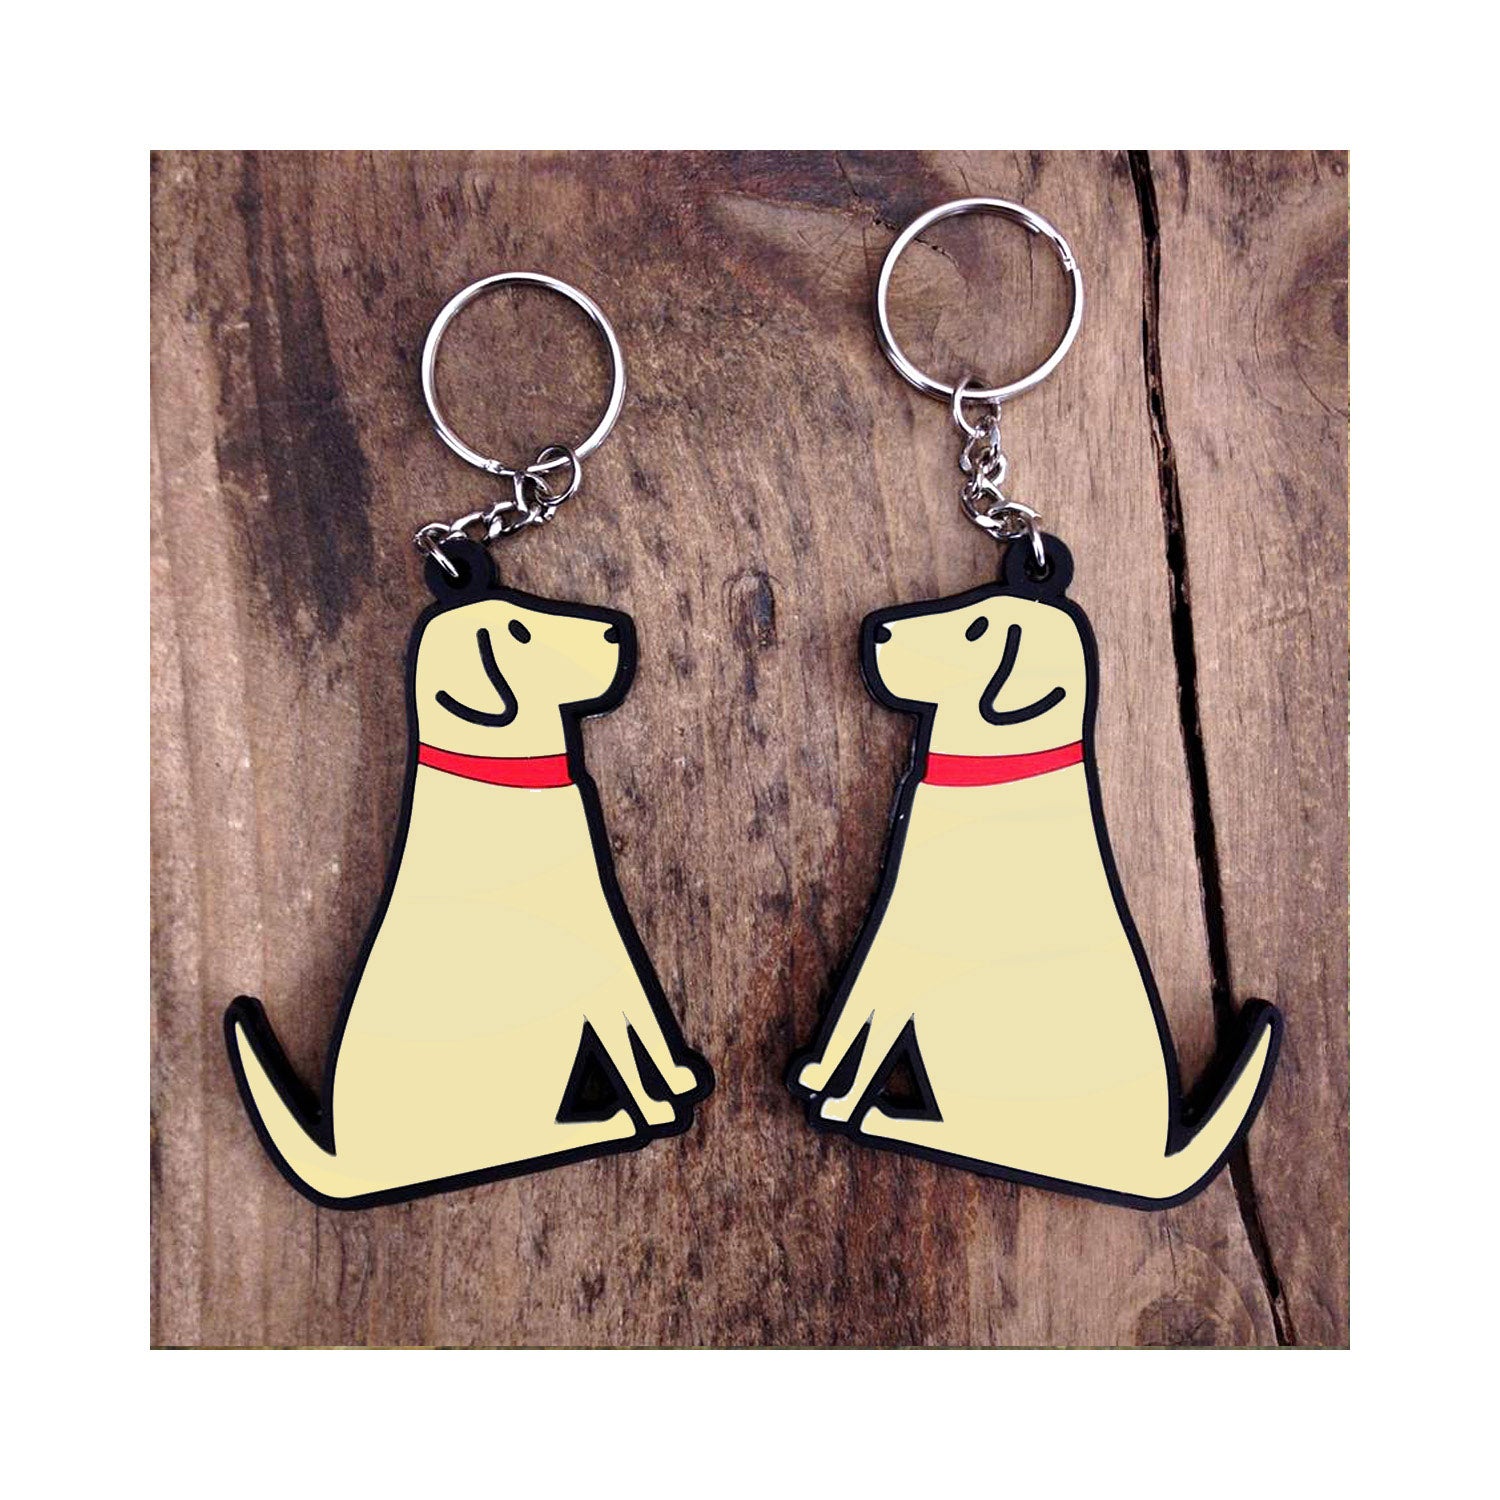 Dog Lover Gifts available at Dog Krazy Gifts - Daisy The Yellow Labrador Keyring - part of the Sweet William range available from Dog Krazy Gifts